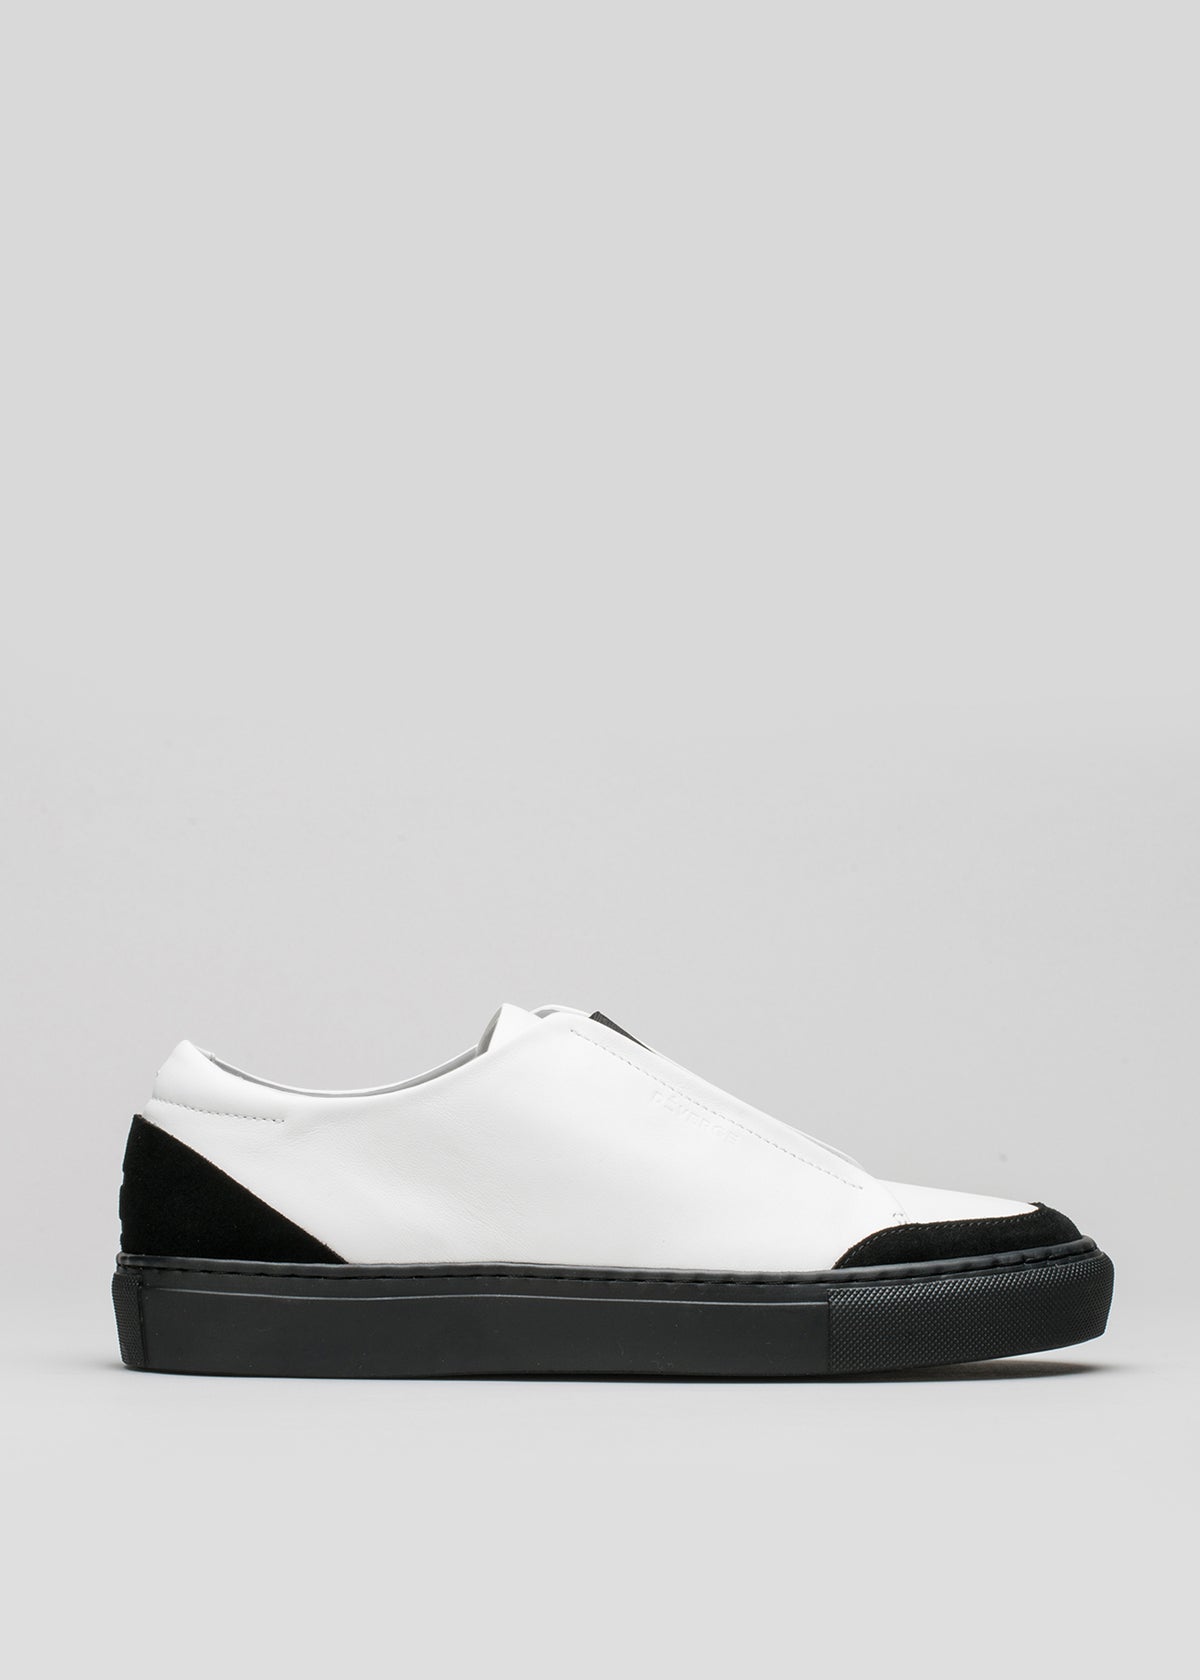 A white slip-on sneaker with a black sole and toe cap, displayed against a light grey background.